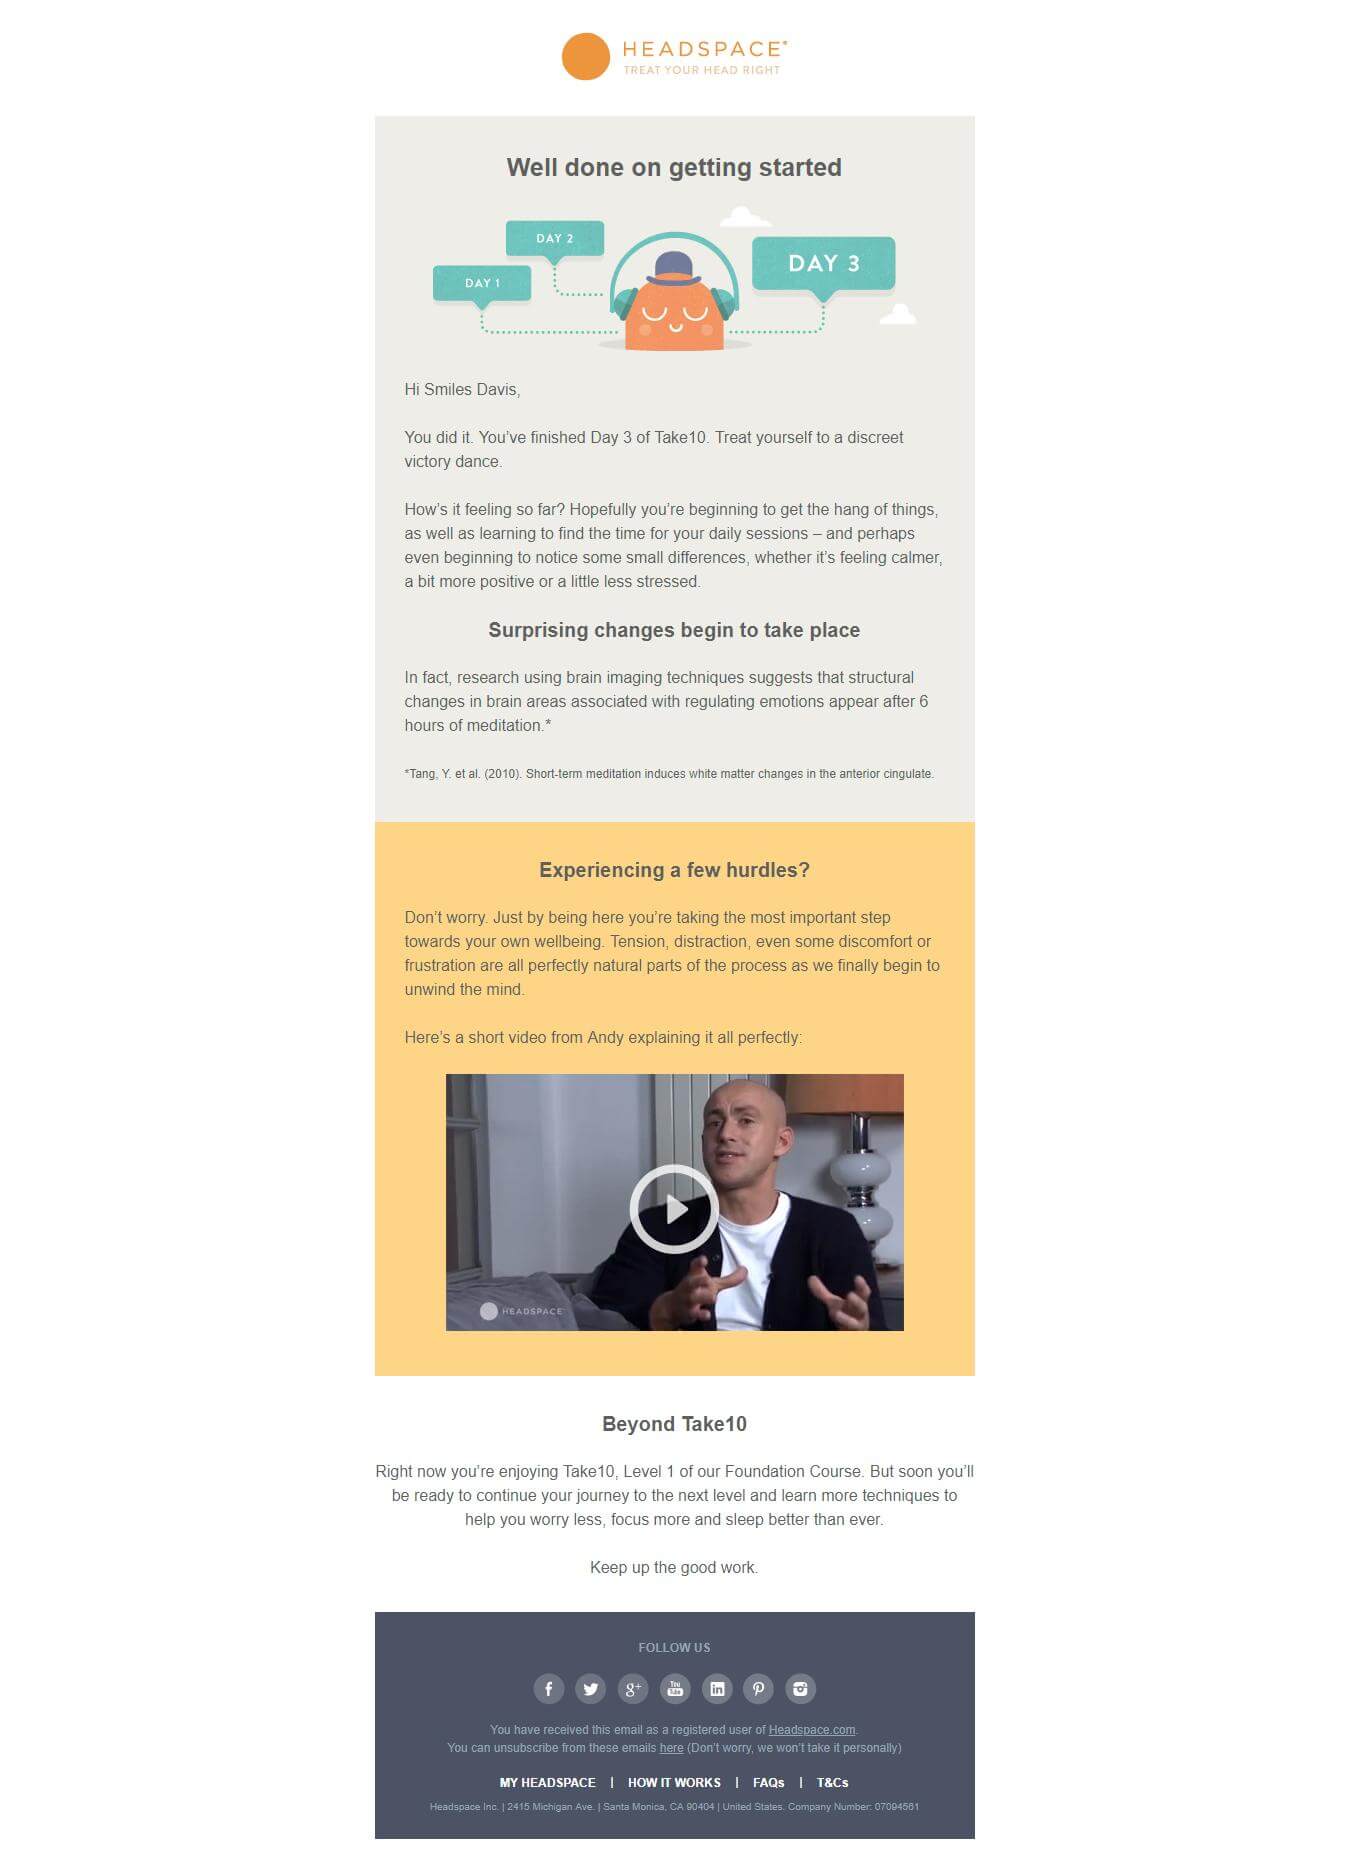 idees newsletters headspace